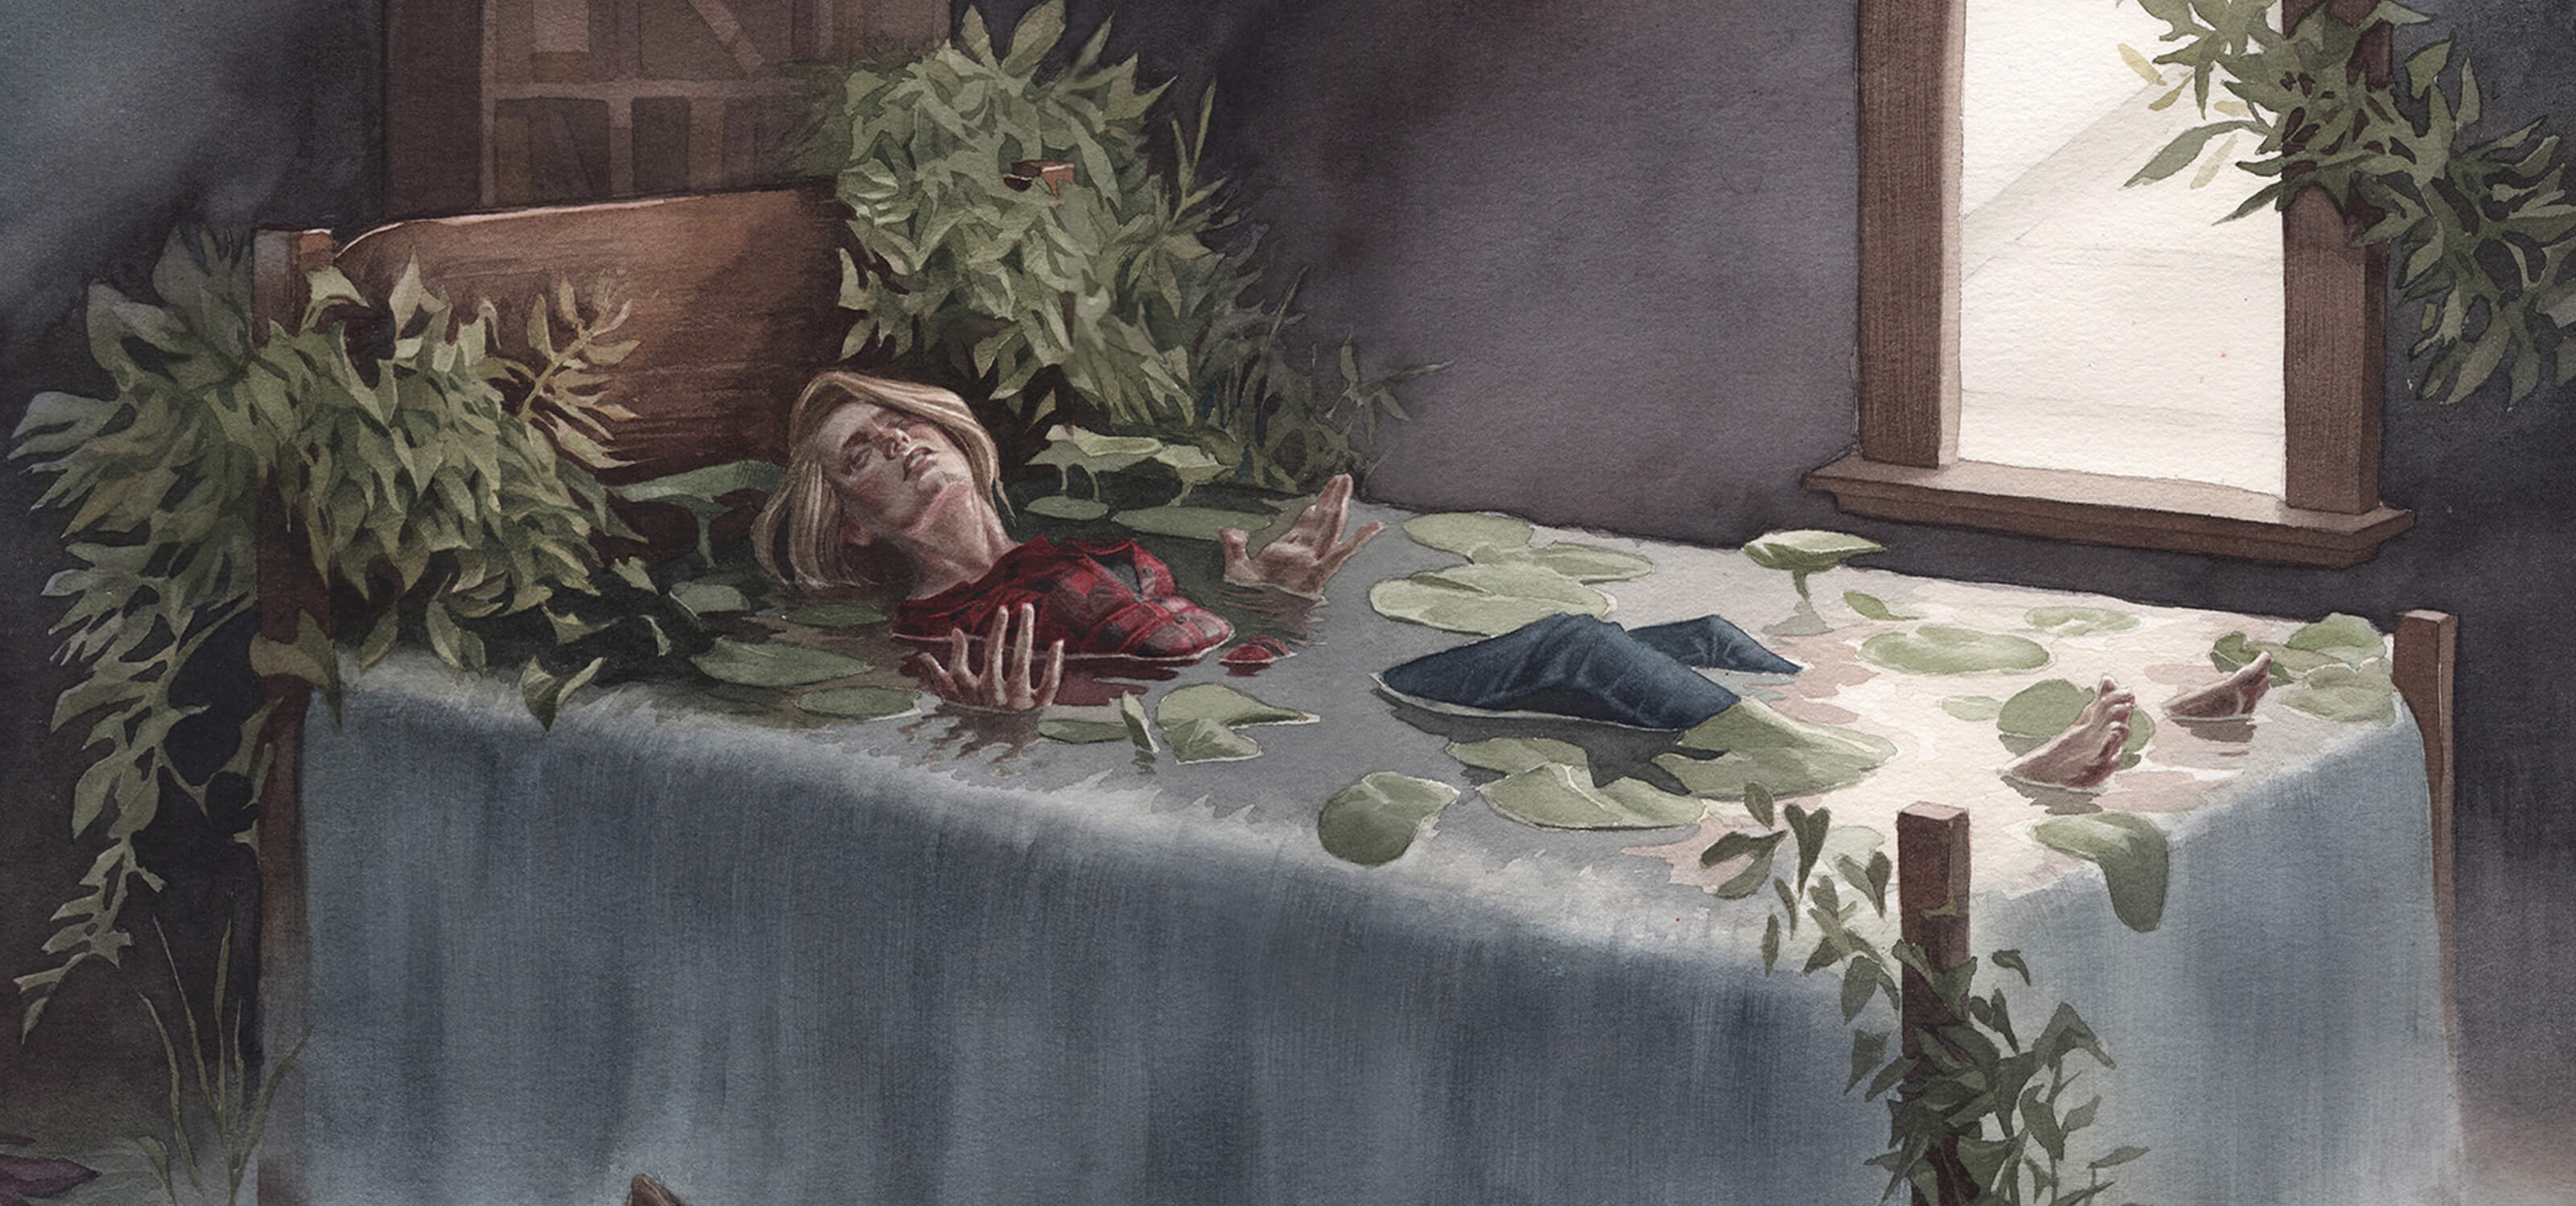 A watercolor painting of a woman laying partially submerged in an overflowing basin of water.